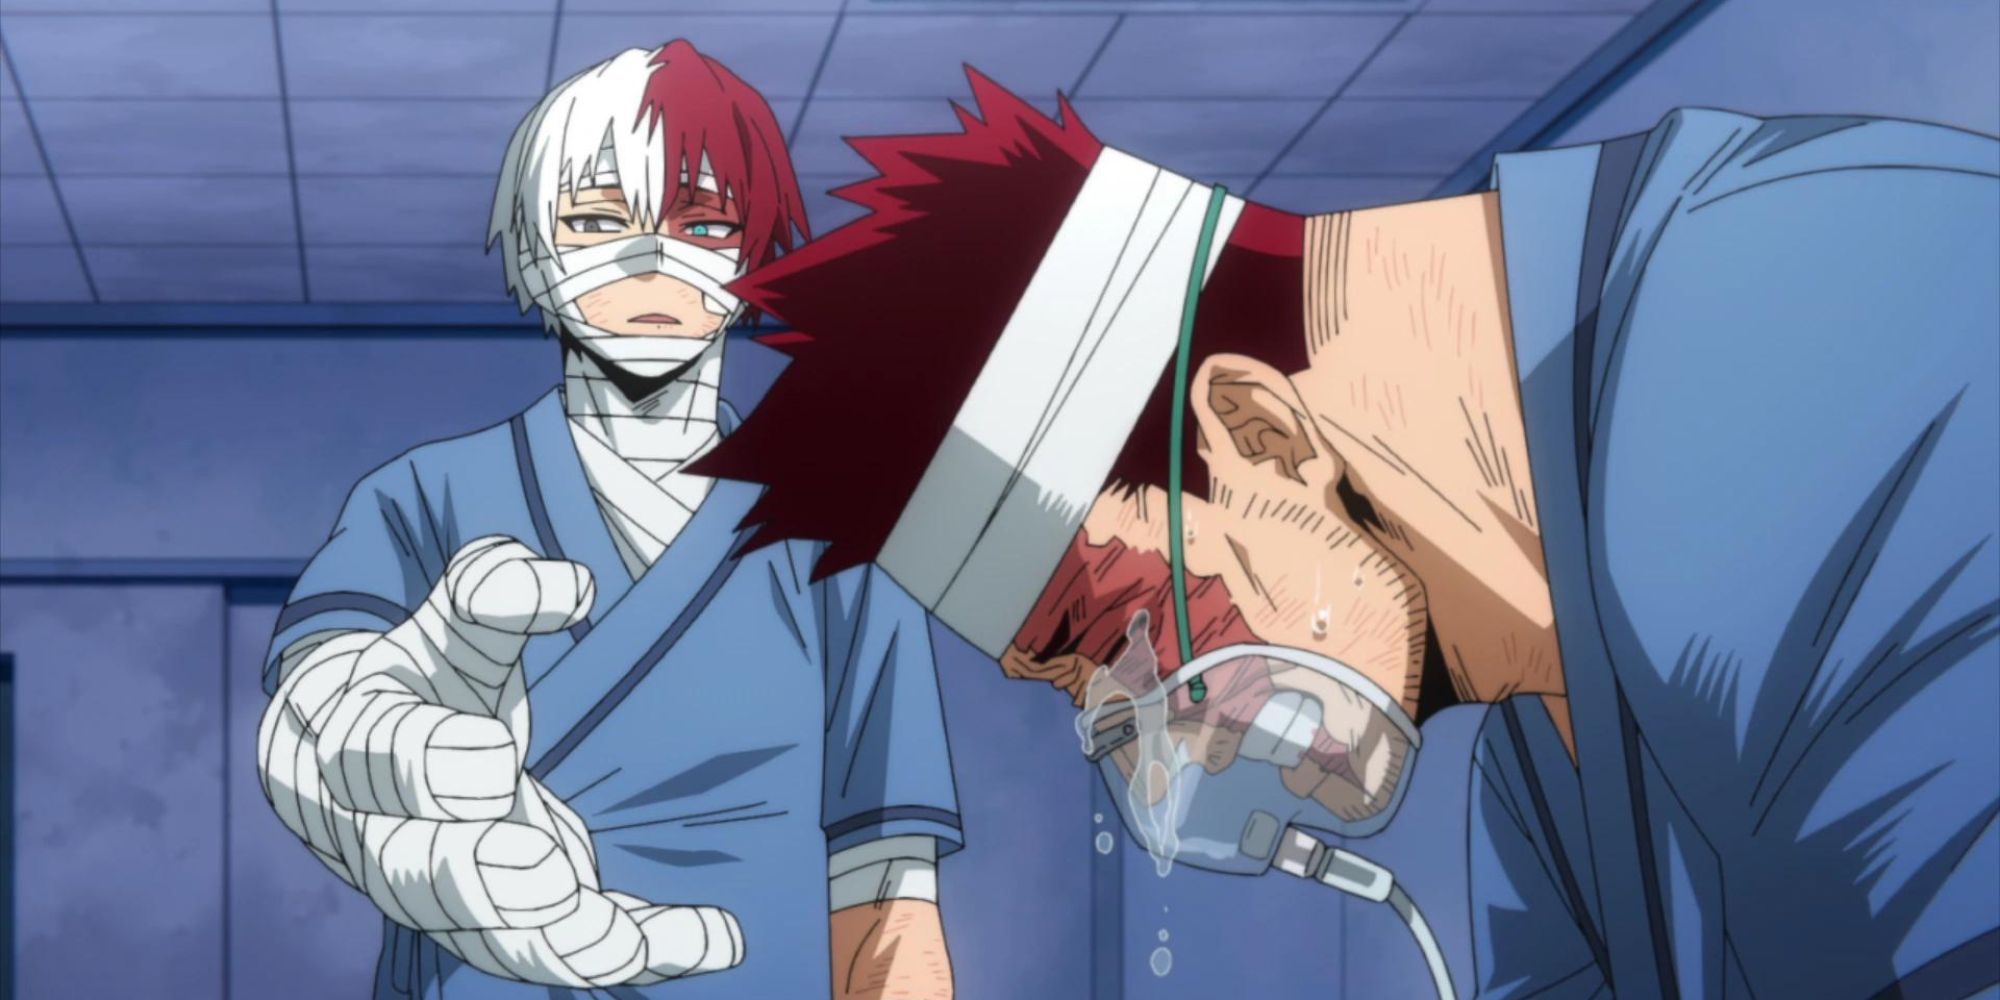 Shoto Todoroki tells his father, Enji, that they will stop Toya together.